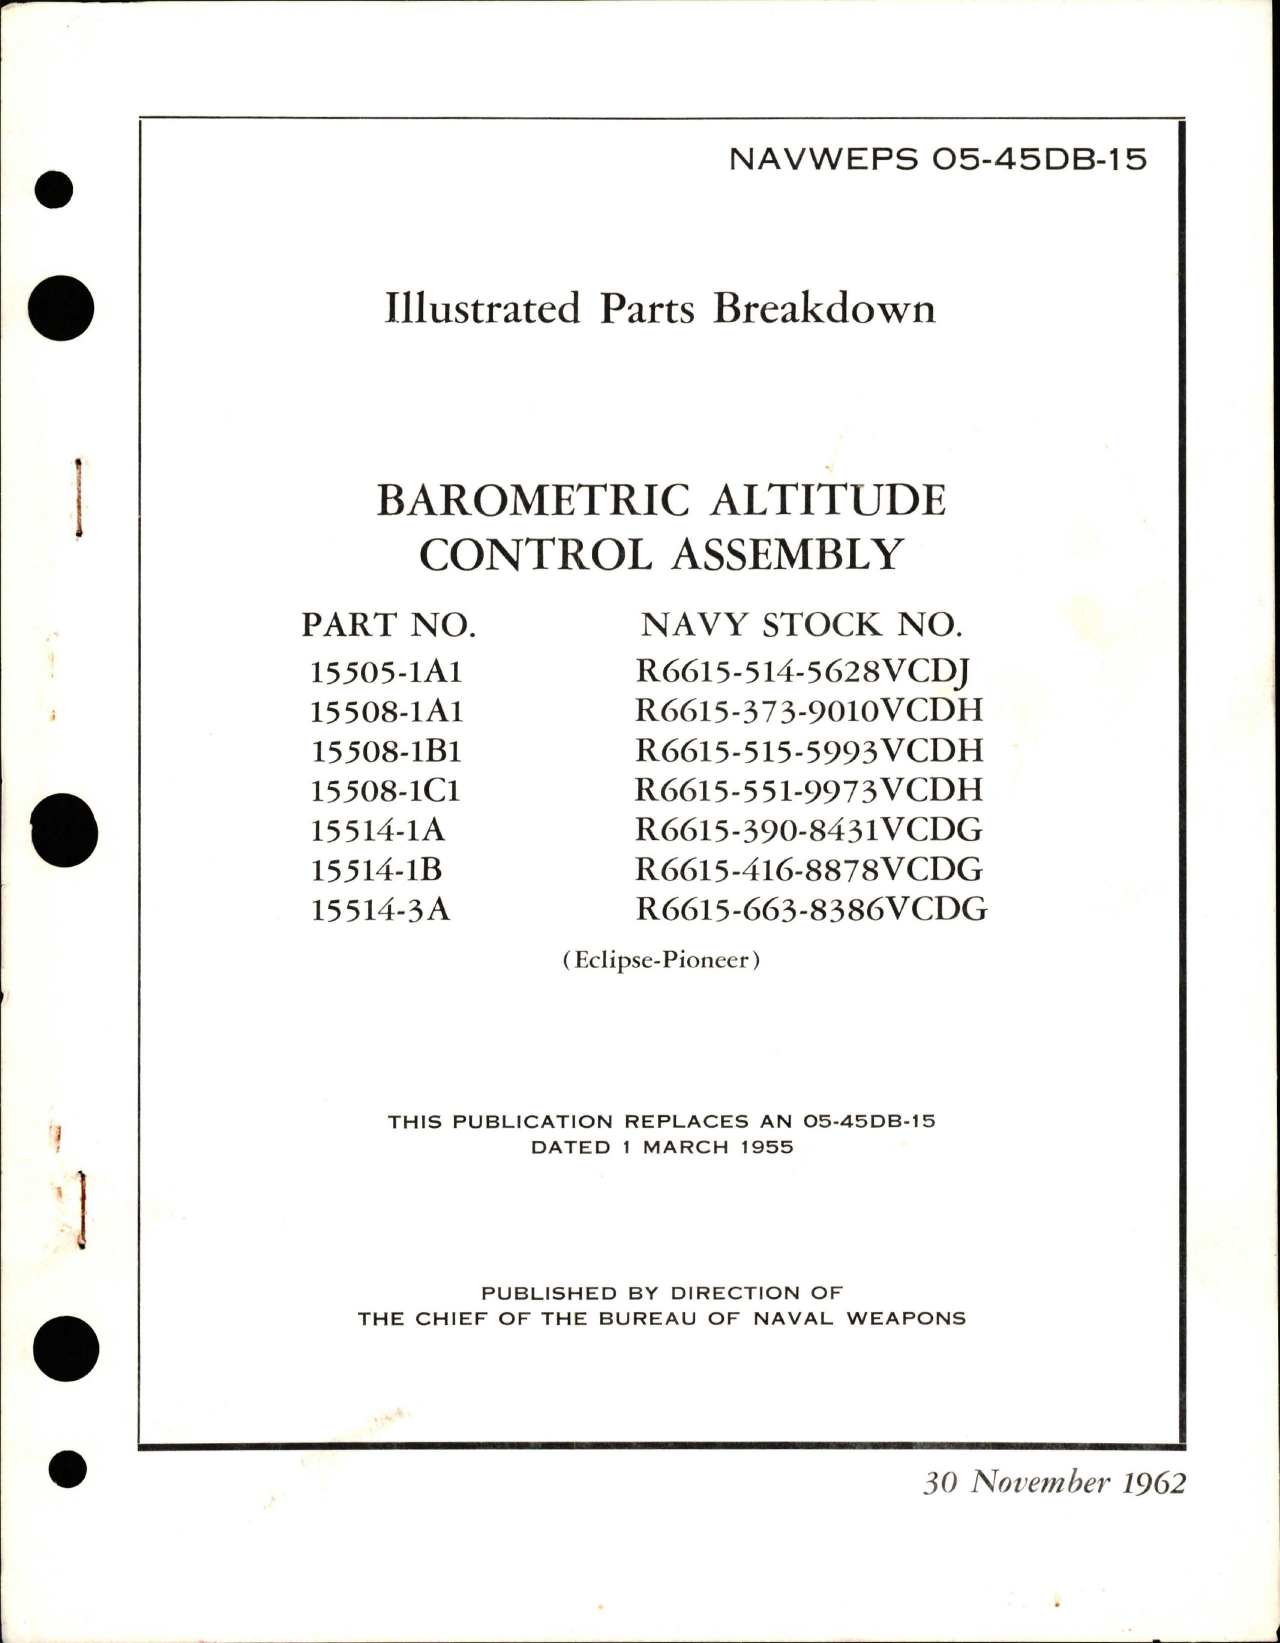 Sample page 1 from AirCorps Library document: Illustrated Parts Breakdown for Barometric Altitude Control Assembly